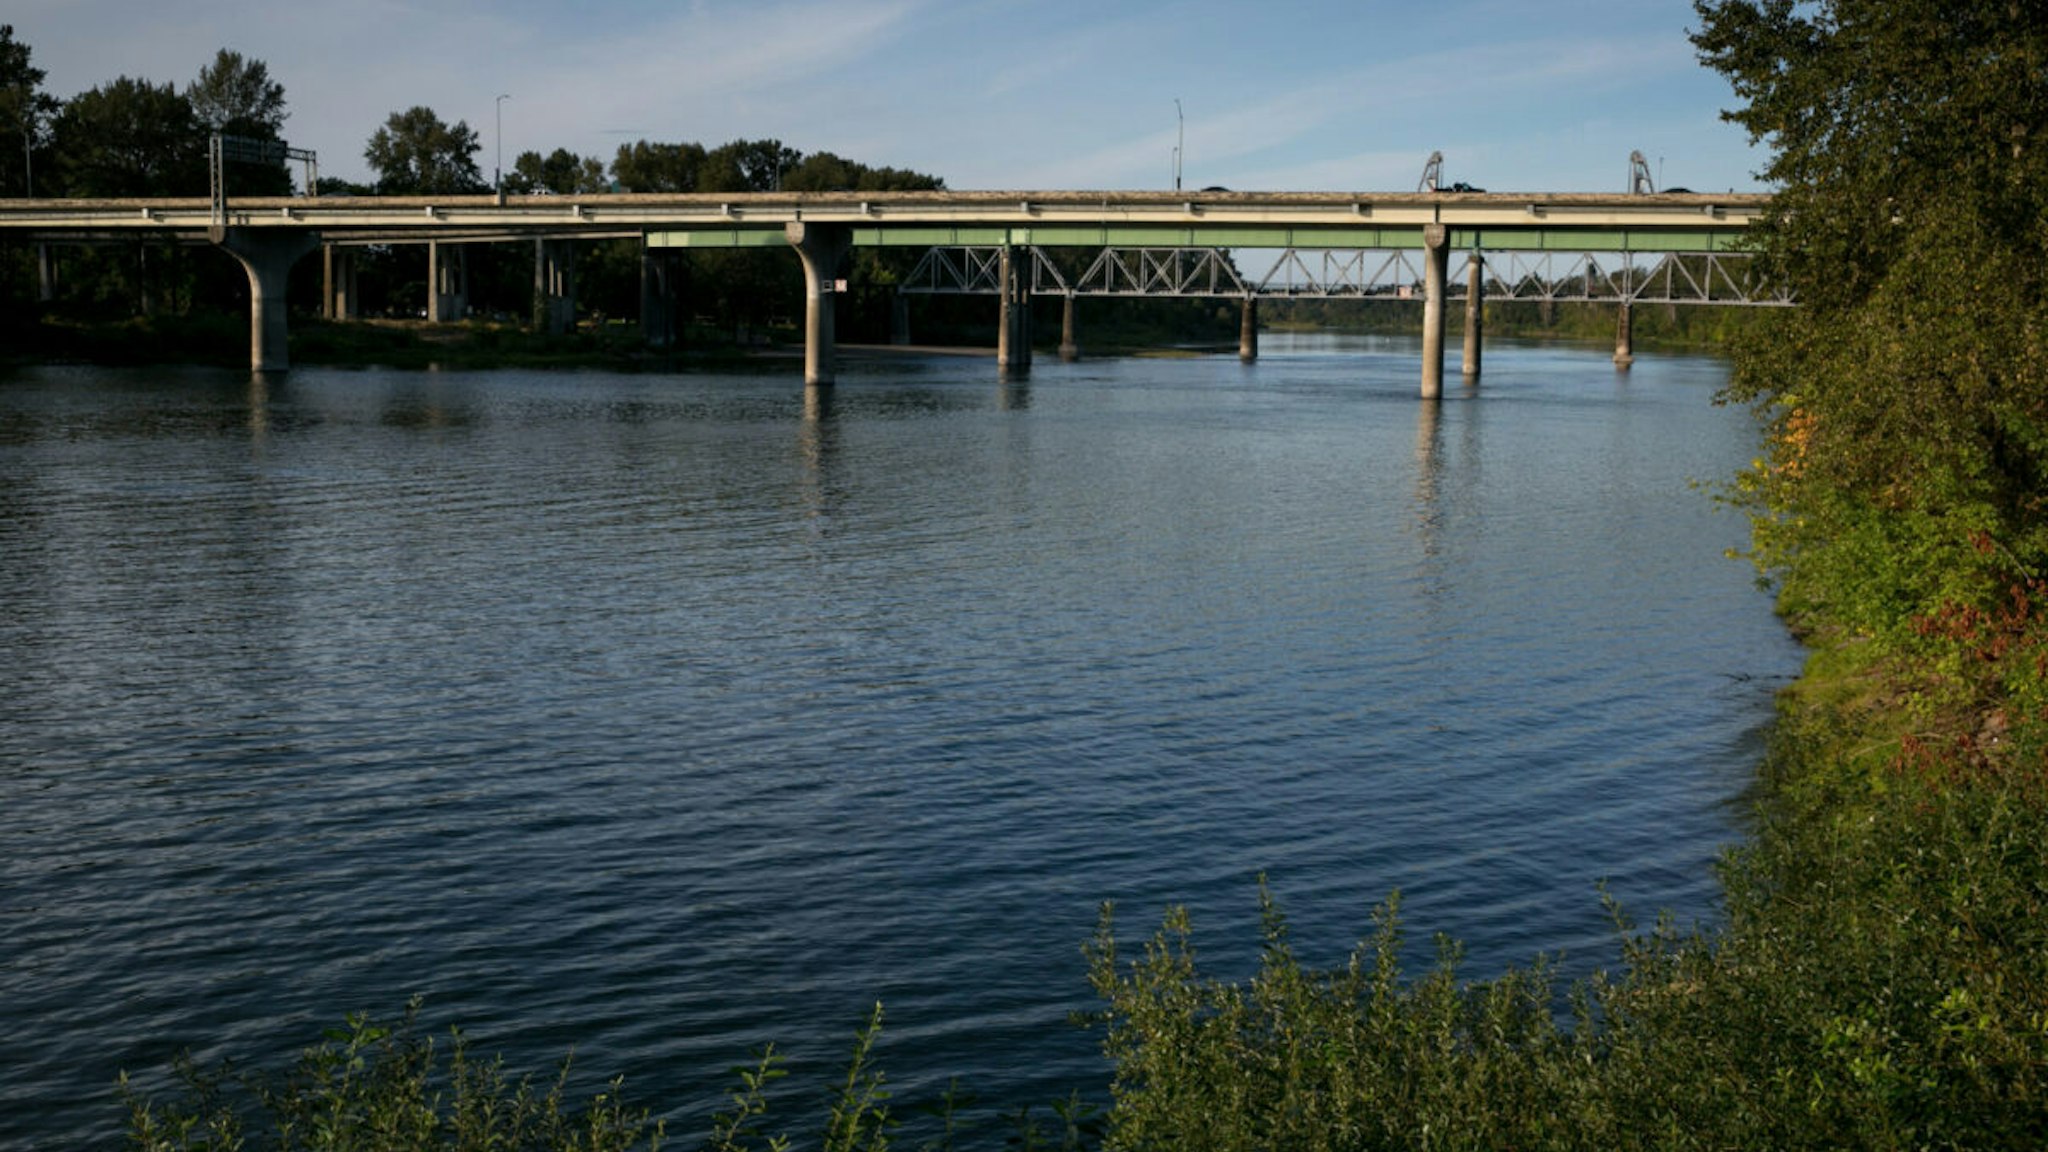 The Willamette River is viewed from Riverfront Park on September 27, 2017, in Salem, Oregon. Dundee, Carlton, McMinnville, and Newburg, all small towns located northwest of Salem in the Willamette Valley wine production areas, have become the epicenters of Oregon's wine destination tourism